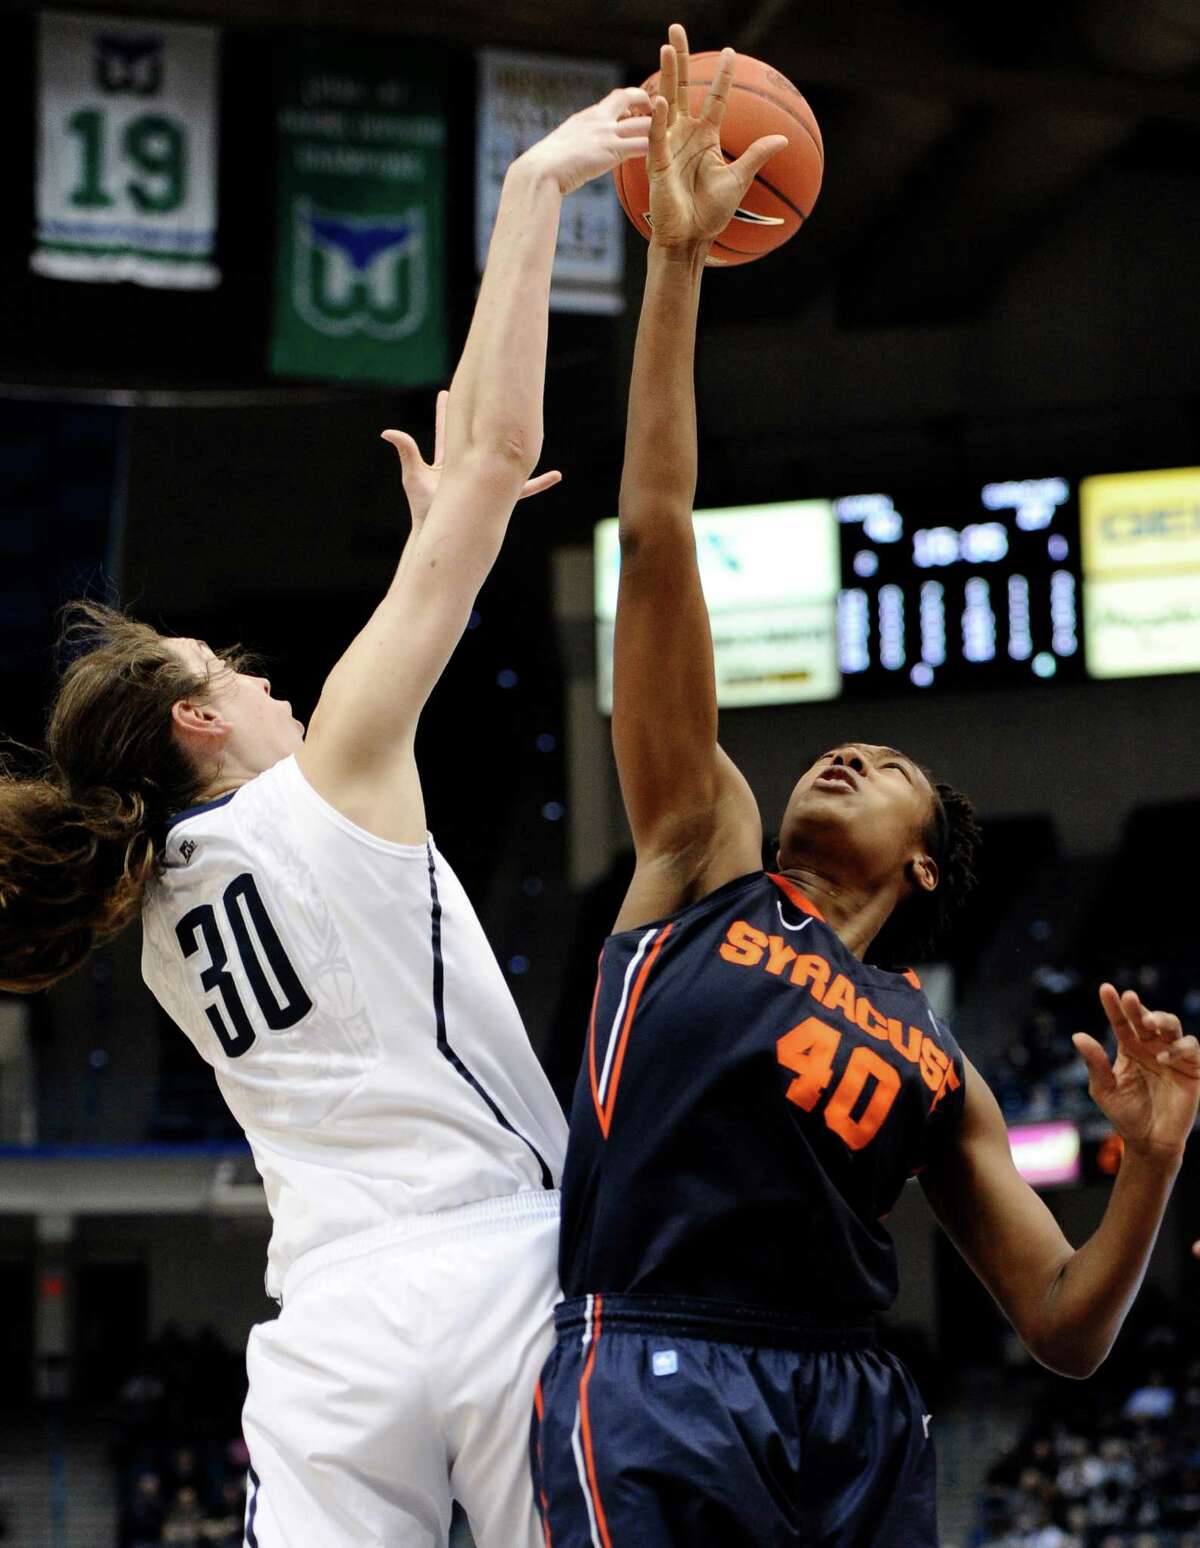 Connecticut's Breanna Stewart, left, and Syracuse's Kayla Alexander fight for a rebound in the second half of an NCAA college basketball game in the semifinals of the Big East Conference women's tournament in Hartford, Conn., Monday, March 11, 2013. (AP Photo/Jessica Hill)